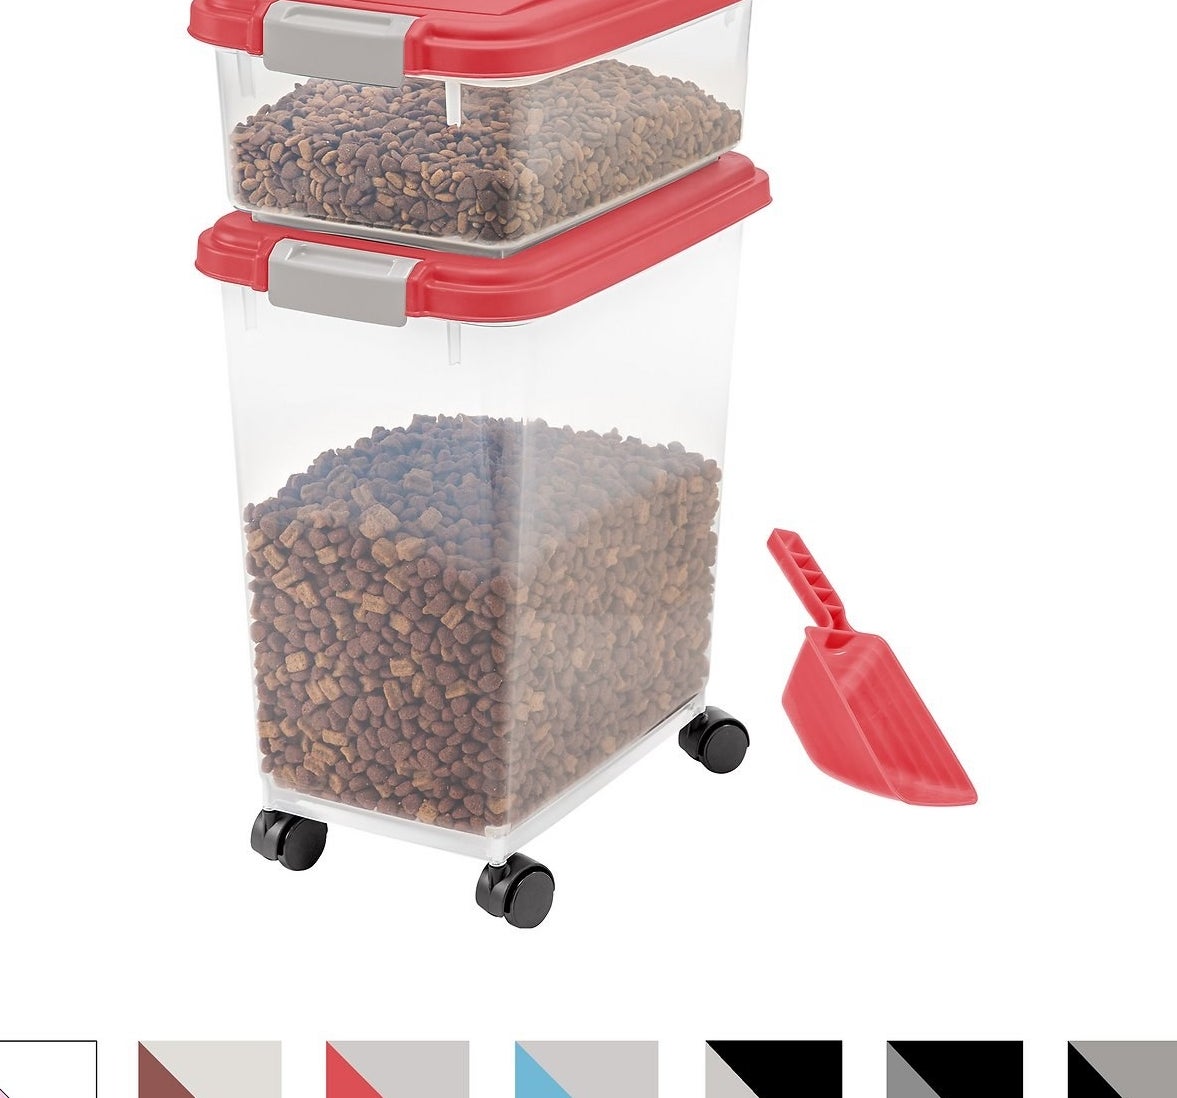 The garnet red/grey red food storage container and scoop combo